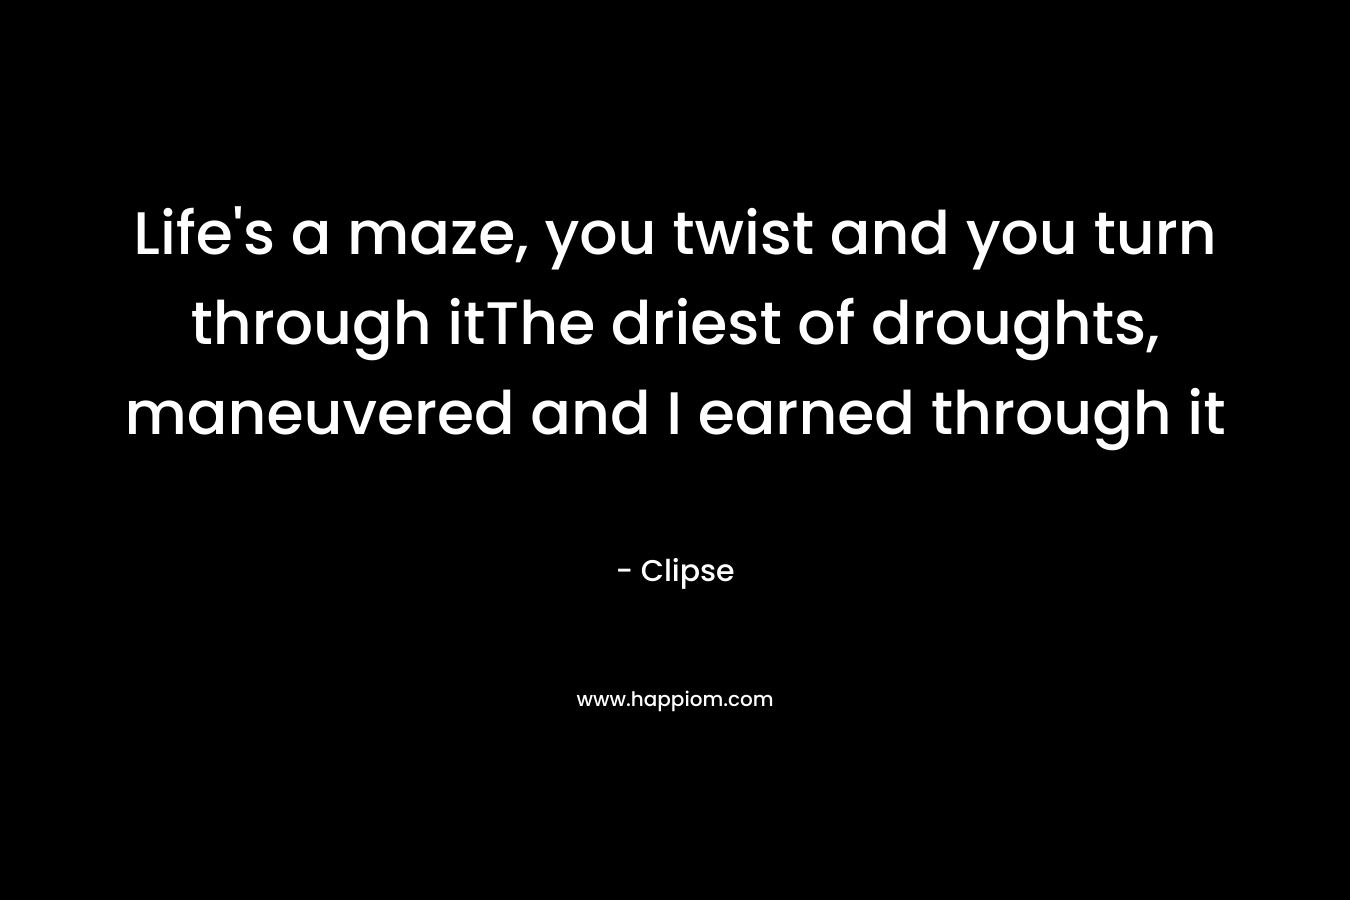 Life’s a maze, you twist and you turn through itThe driest of droughts, maneuvered and I earned through it – Clipse